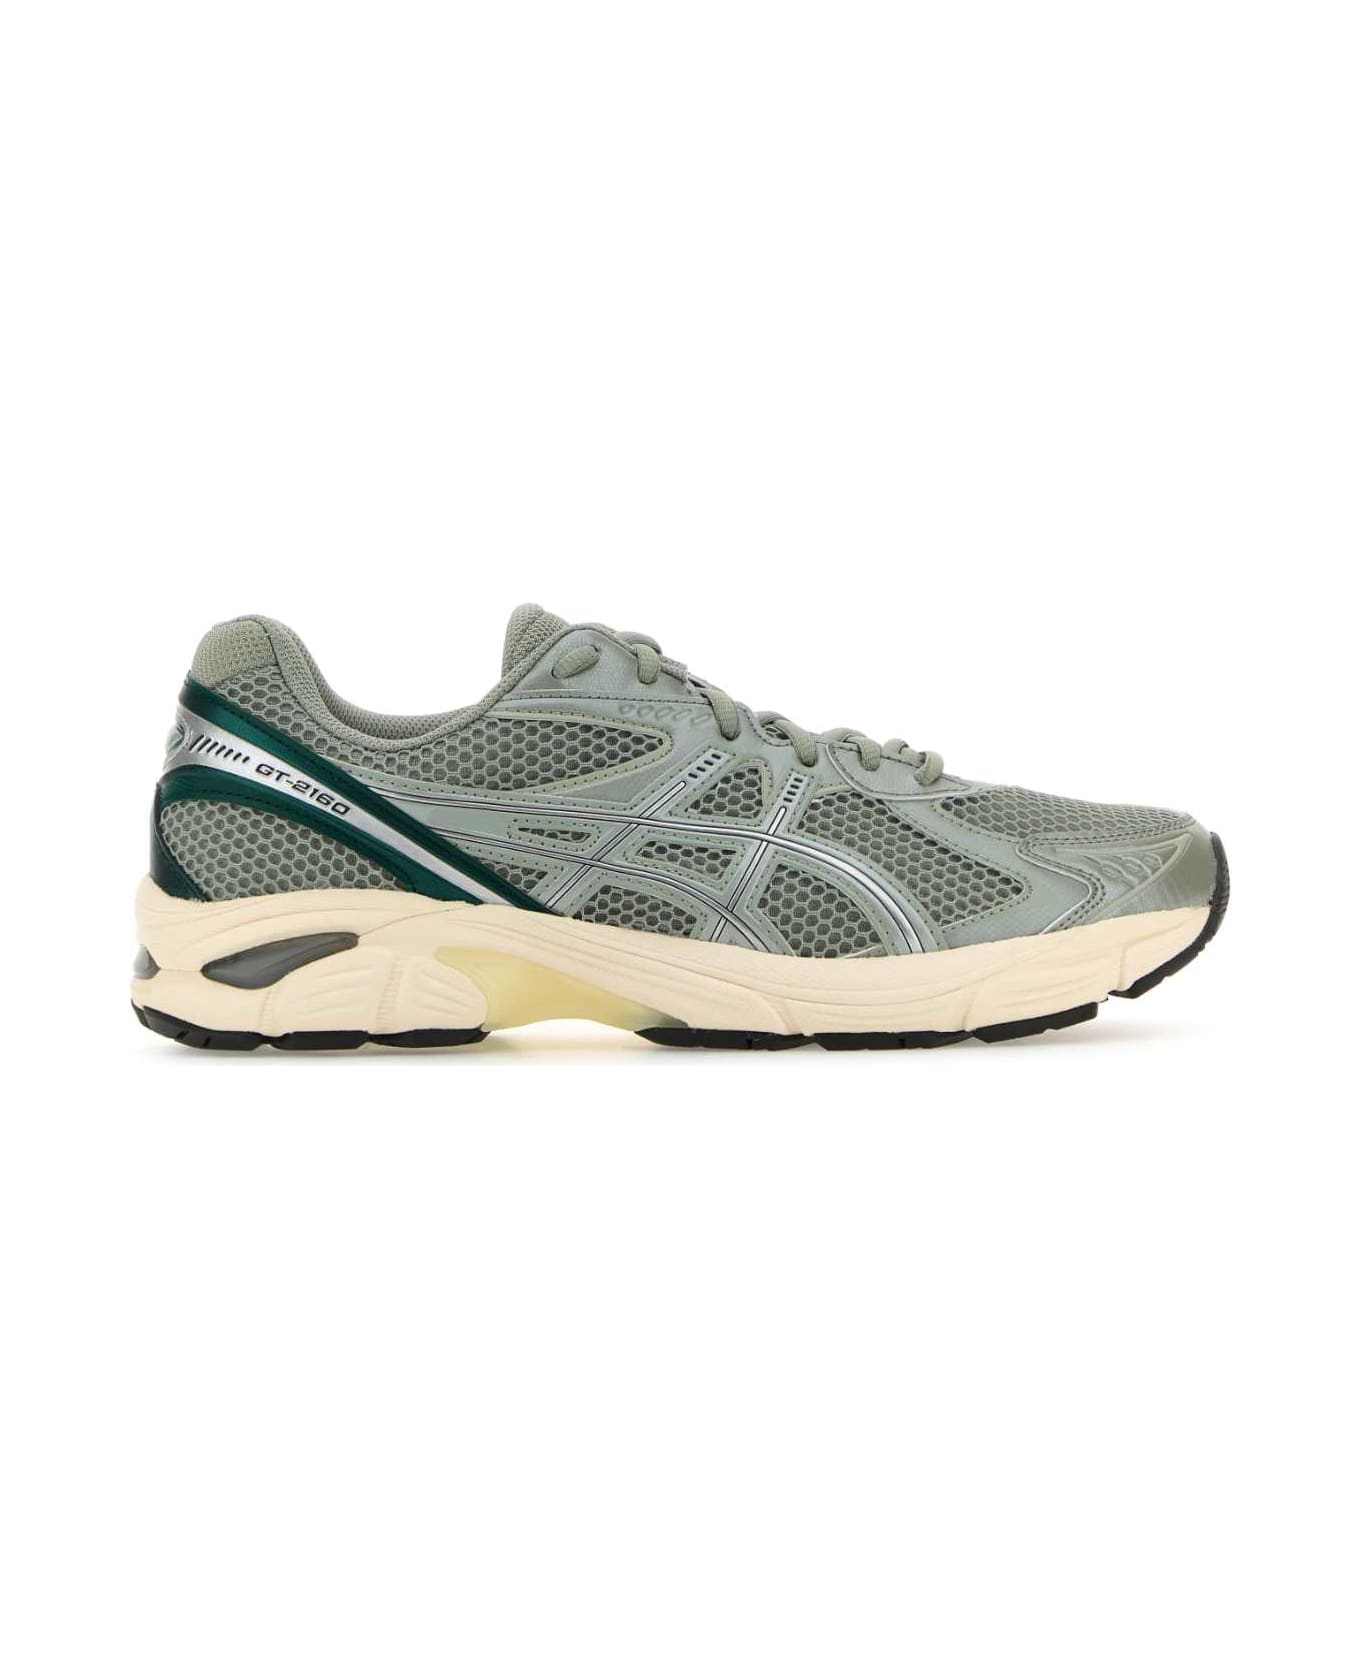 Asics Multicolor Mesh And Synthetic Leather Gt-2160 Sneakers - SEALGREYJEWELGREEN